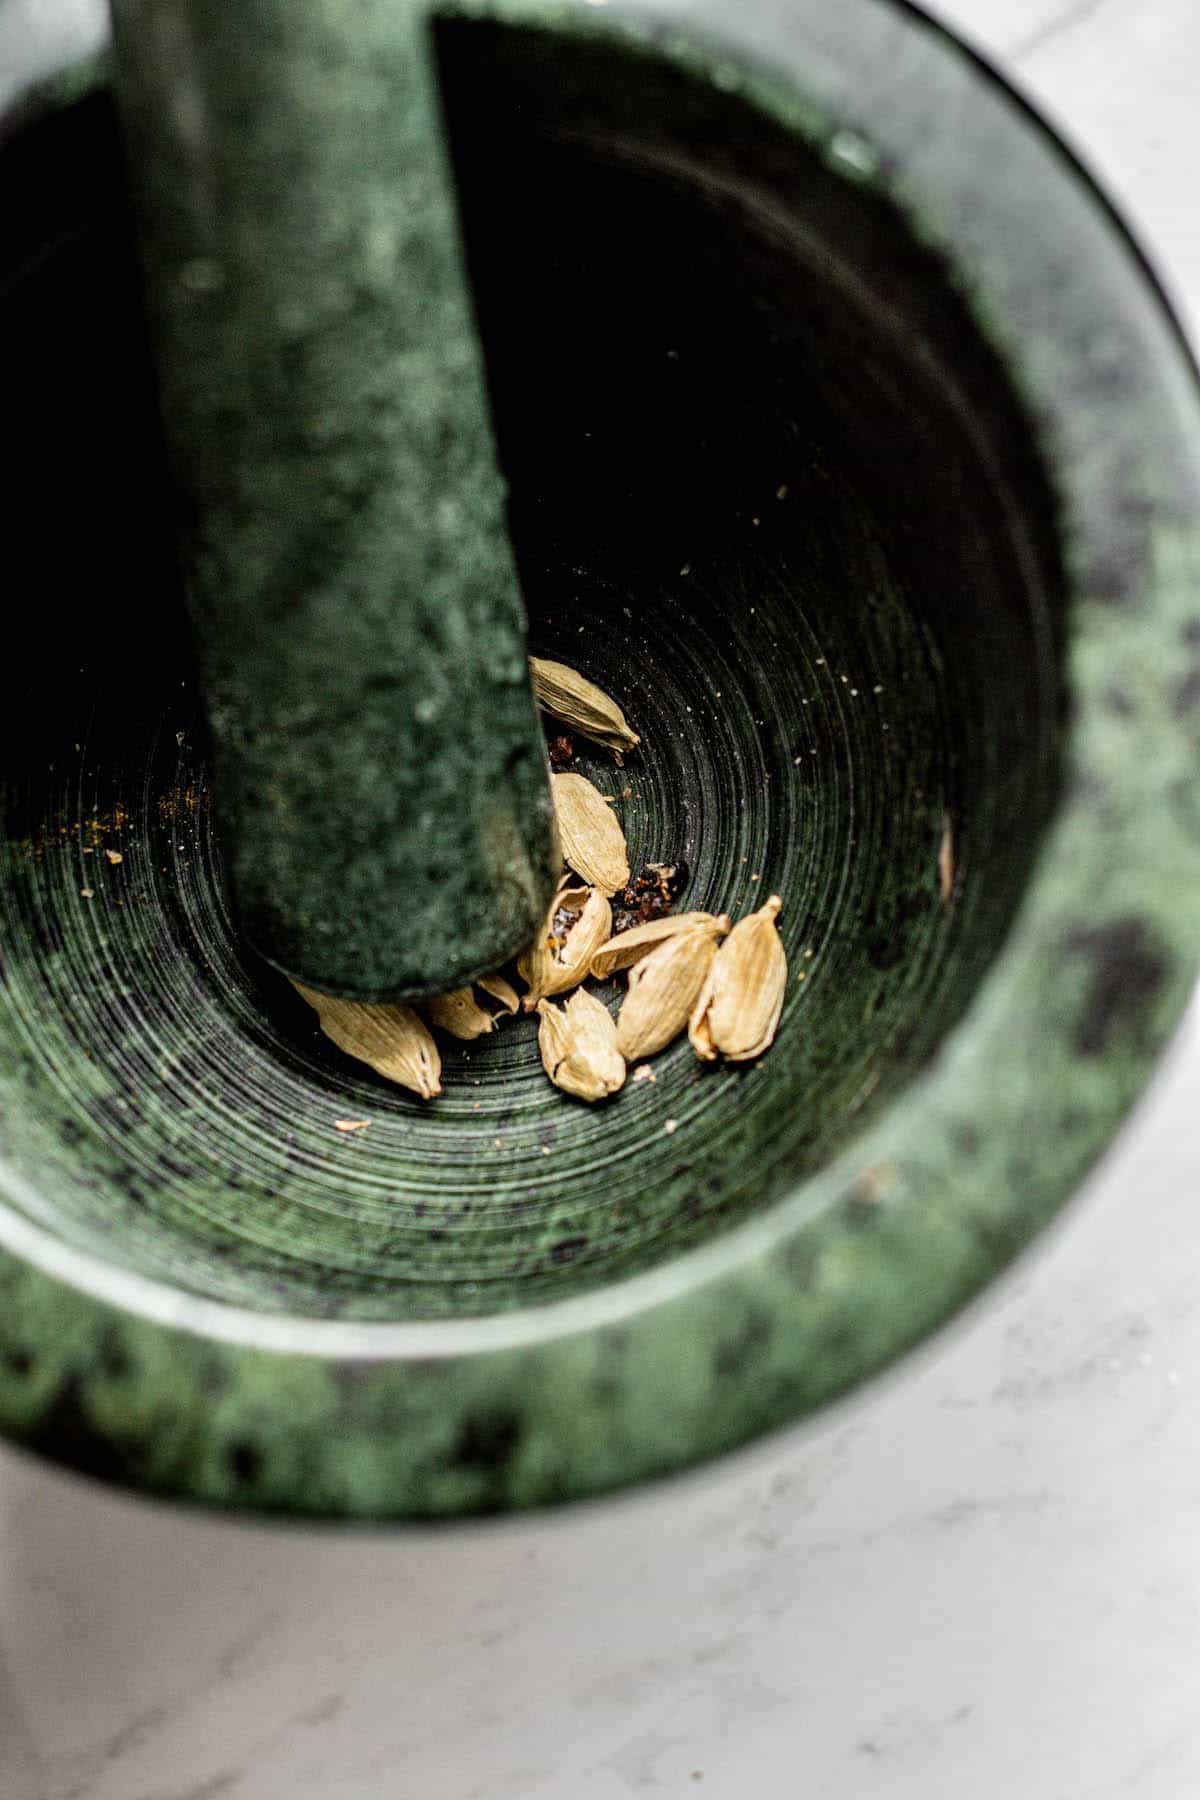 cardamom in a green mortar and pestle being crushed.